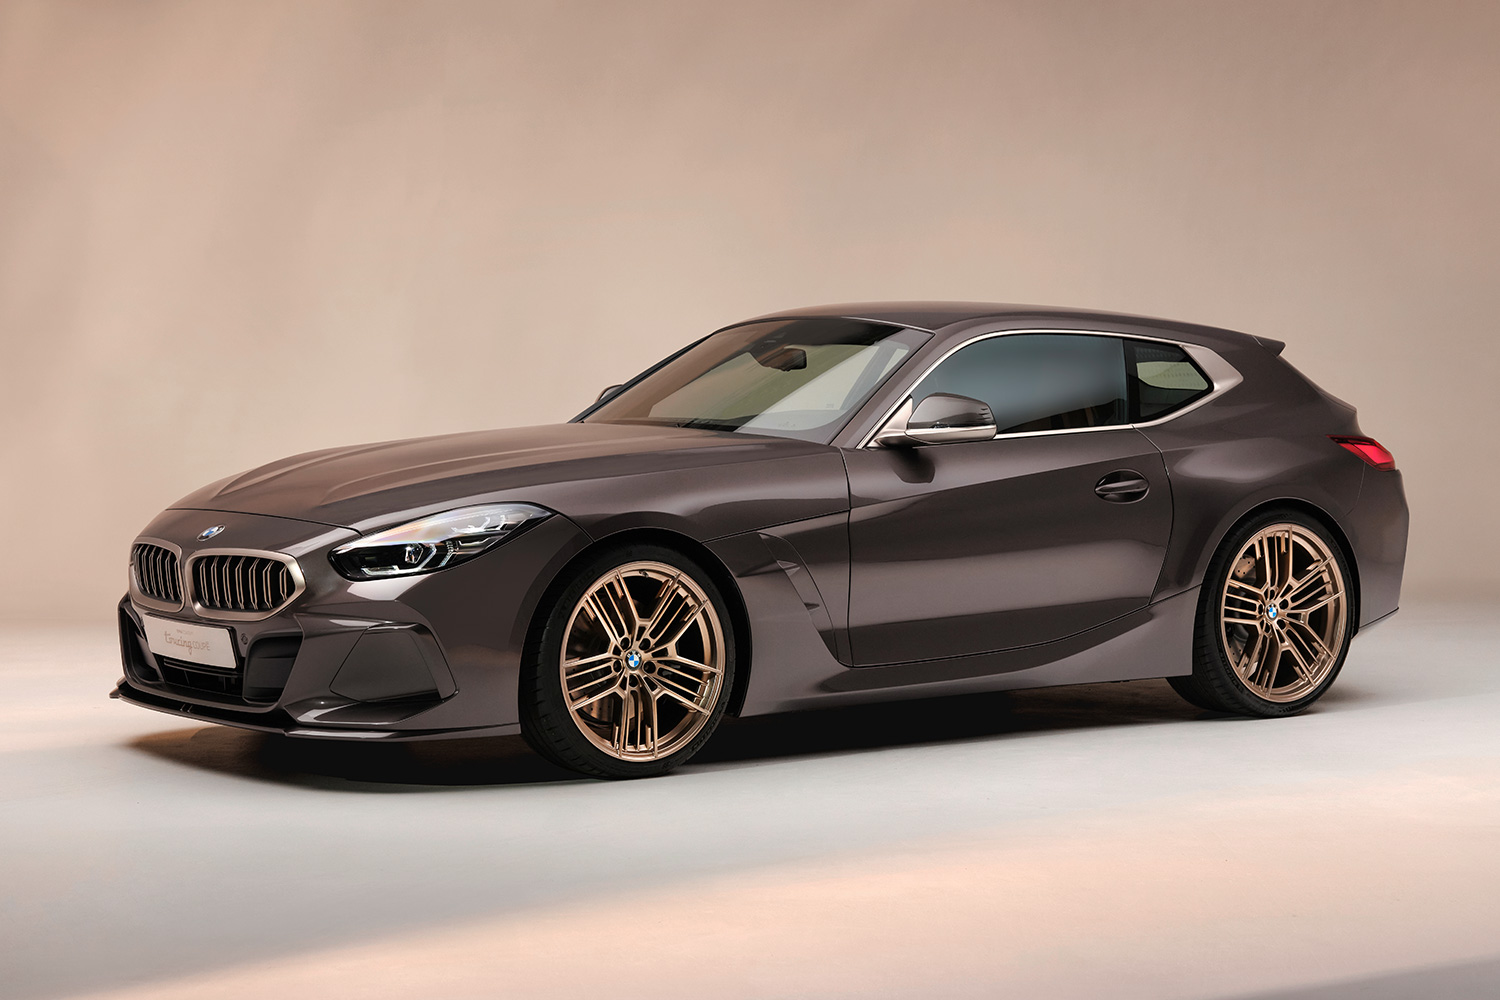 A studio shot of the BMW Concept Touring Coupe